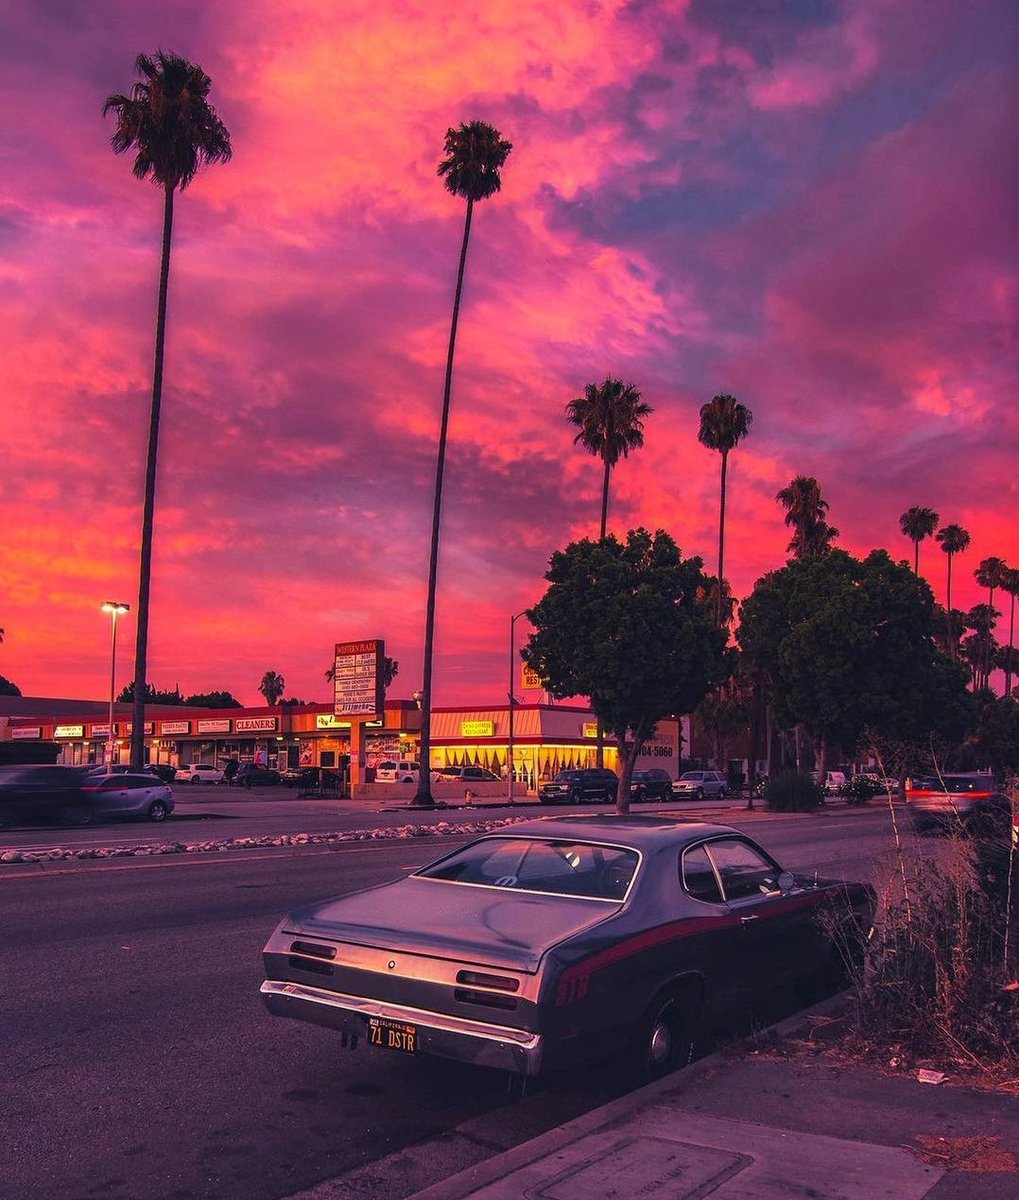 What West Coast song are you riding to with this sunset?